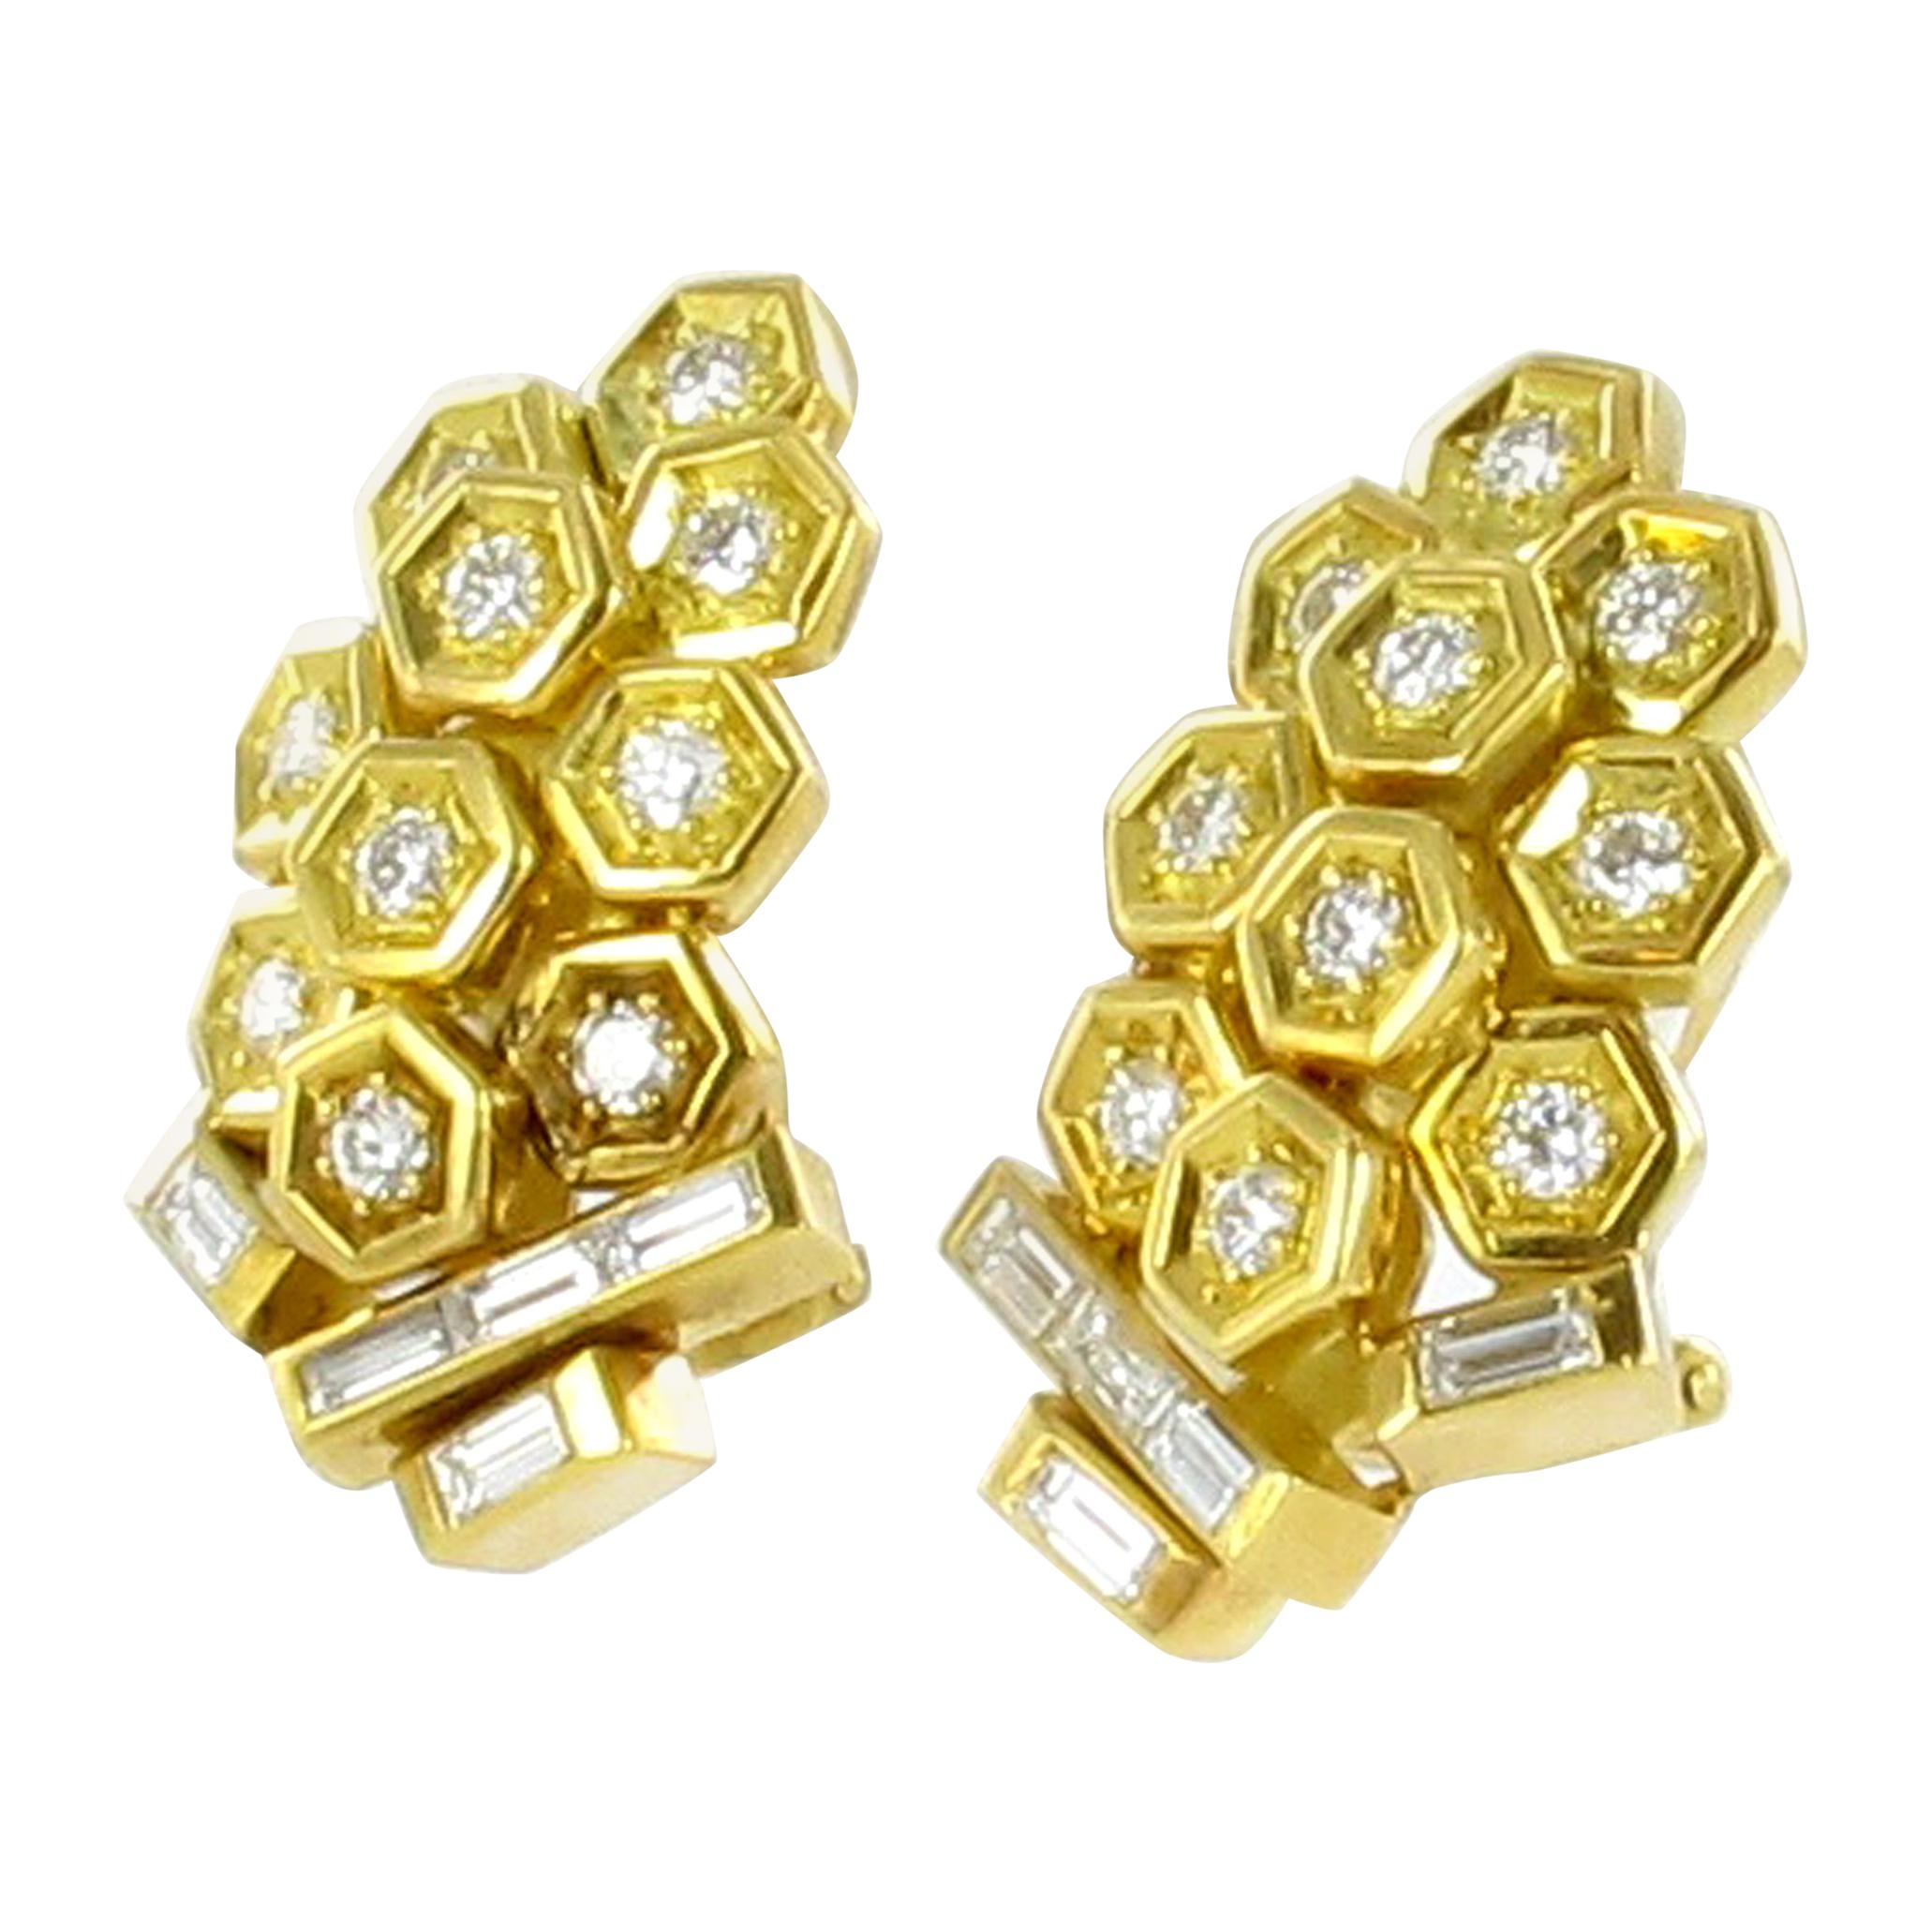 Yellow Gold Diamond Earclips "Cluster of Grapes"